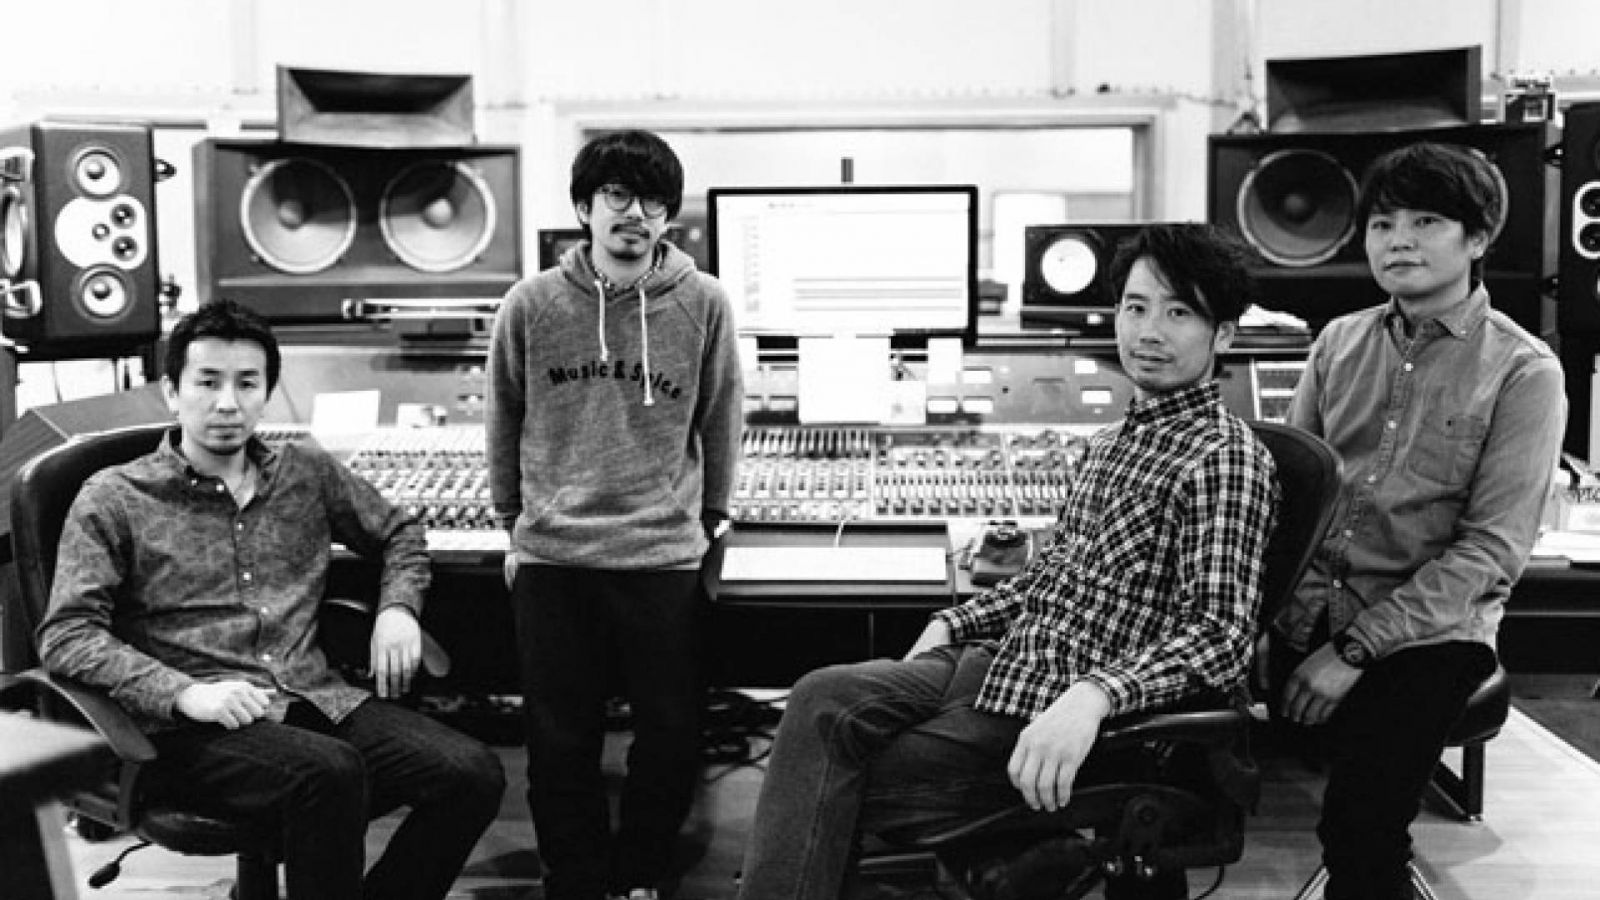 Interview avec ASIAN KUNG-FU GENERATION © 2015 Sony Music Entertainment (Japan) Inc. All rights reserved.